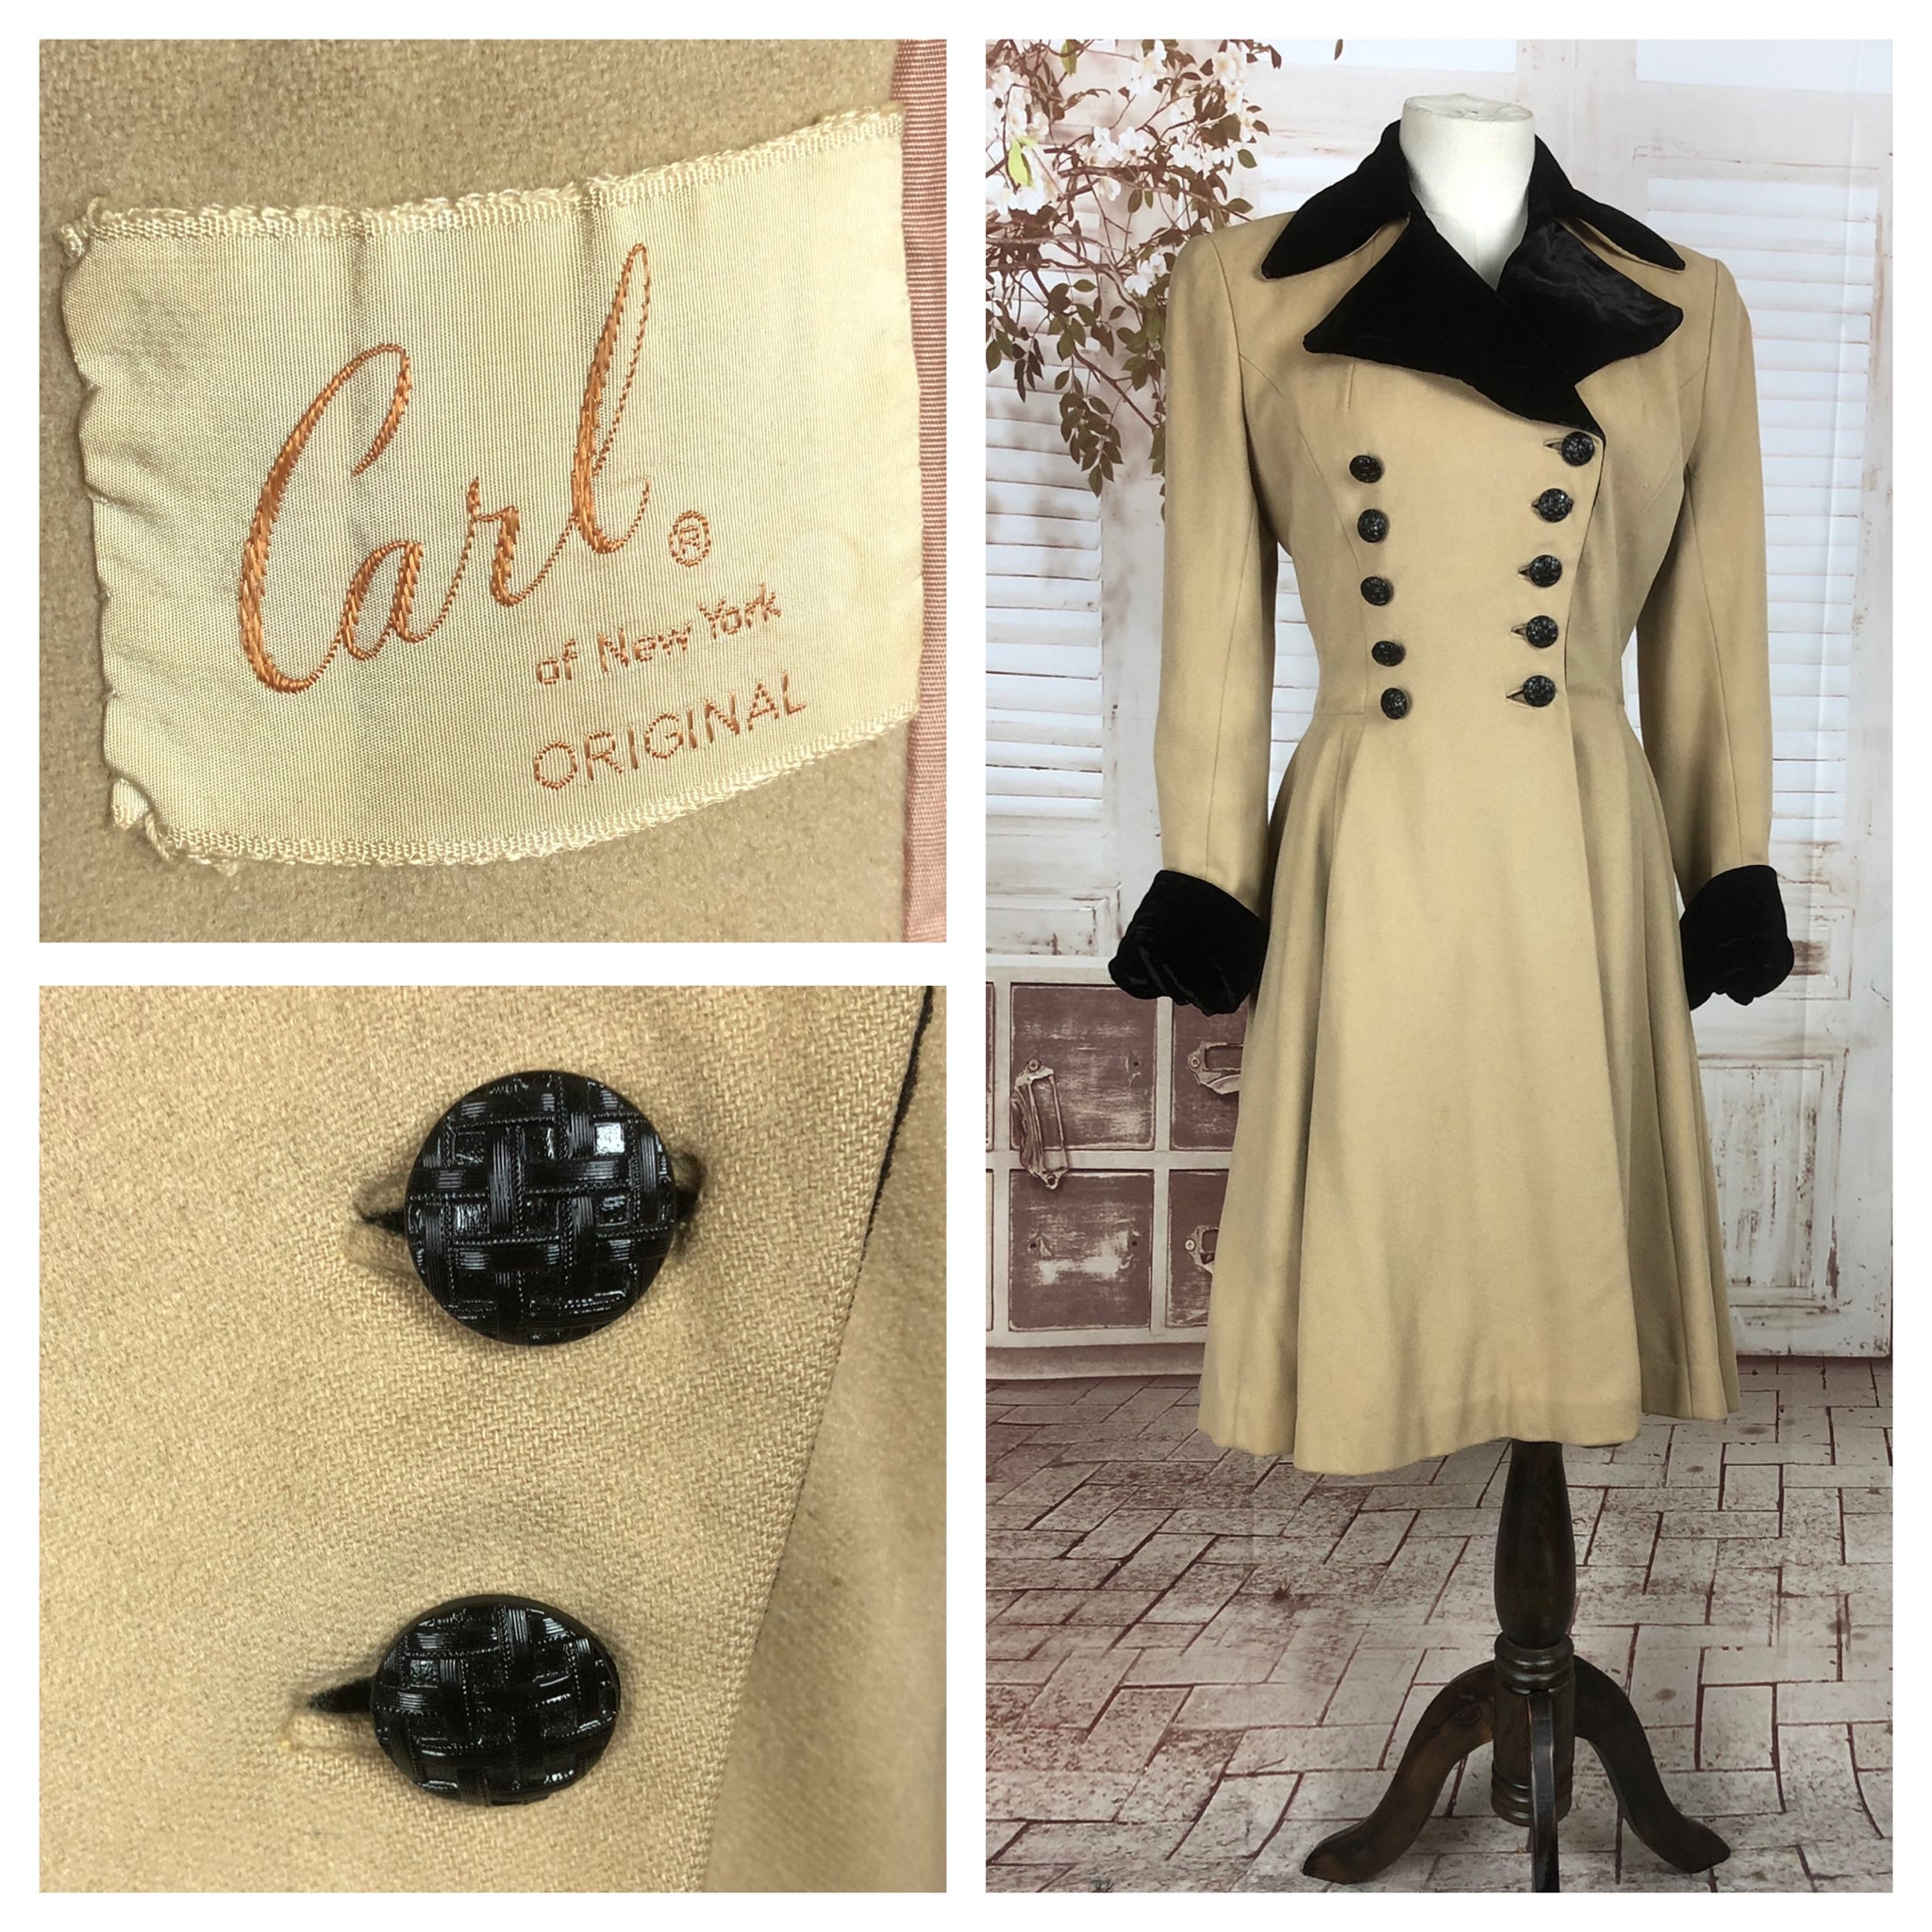 Original Late 1930s Early 1940s Cream Wool Double Breasted Princess Cut Coat With Black Velvet Collar And Cuffs